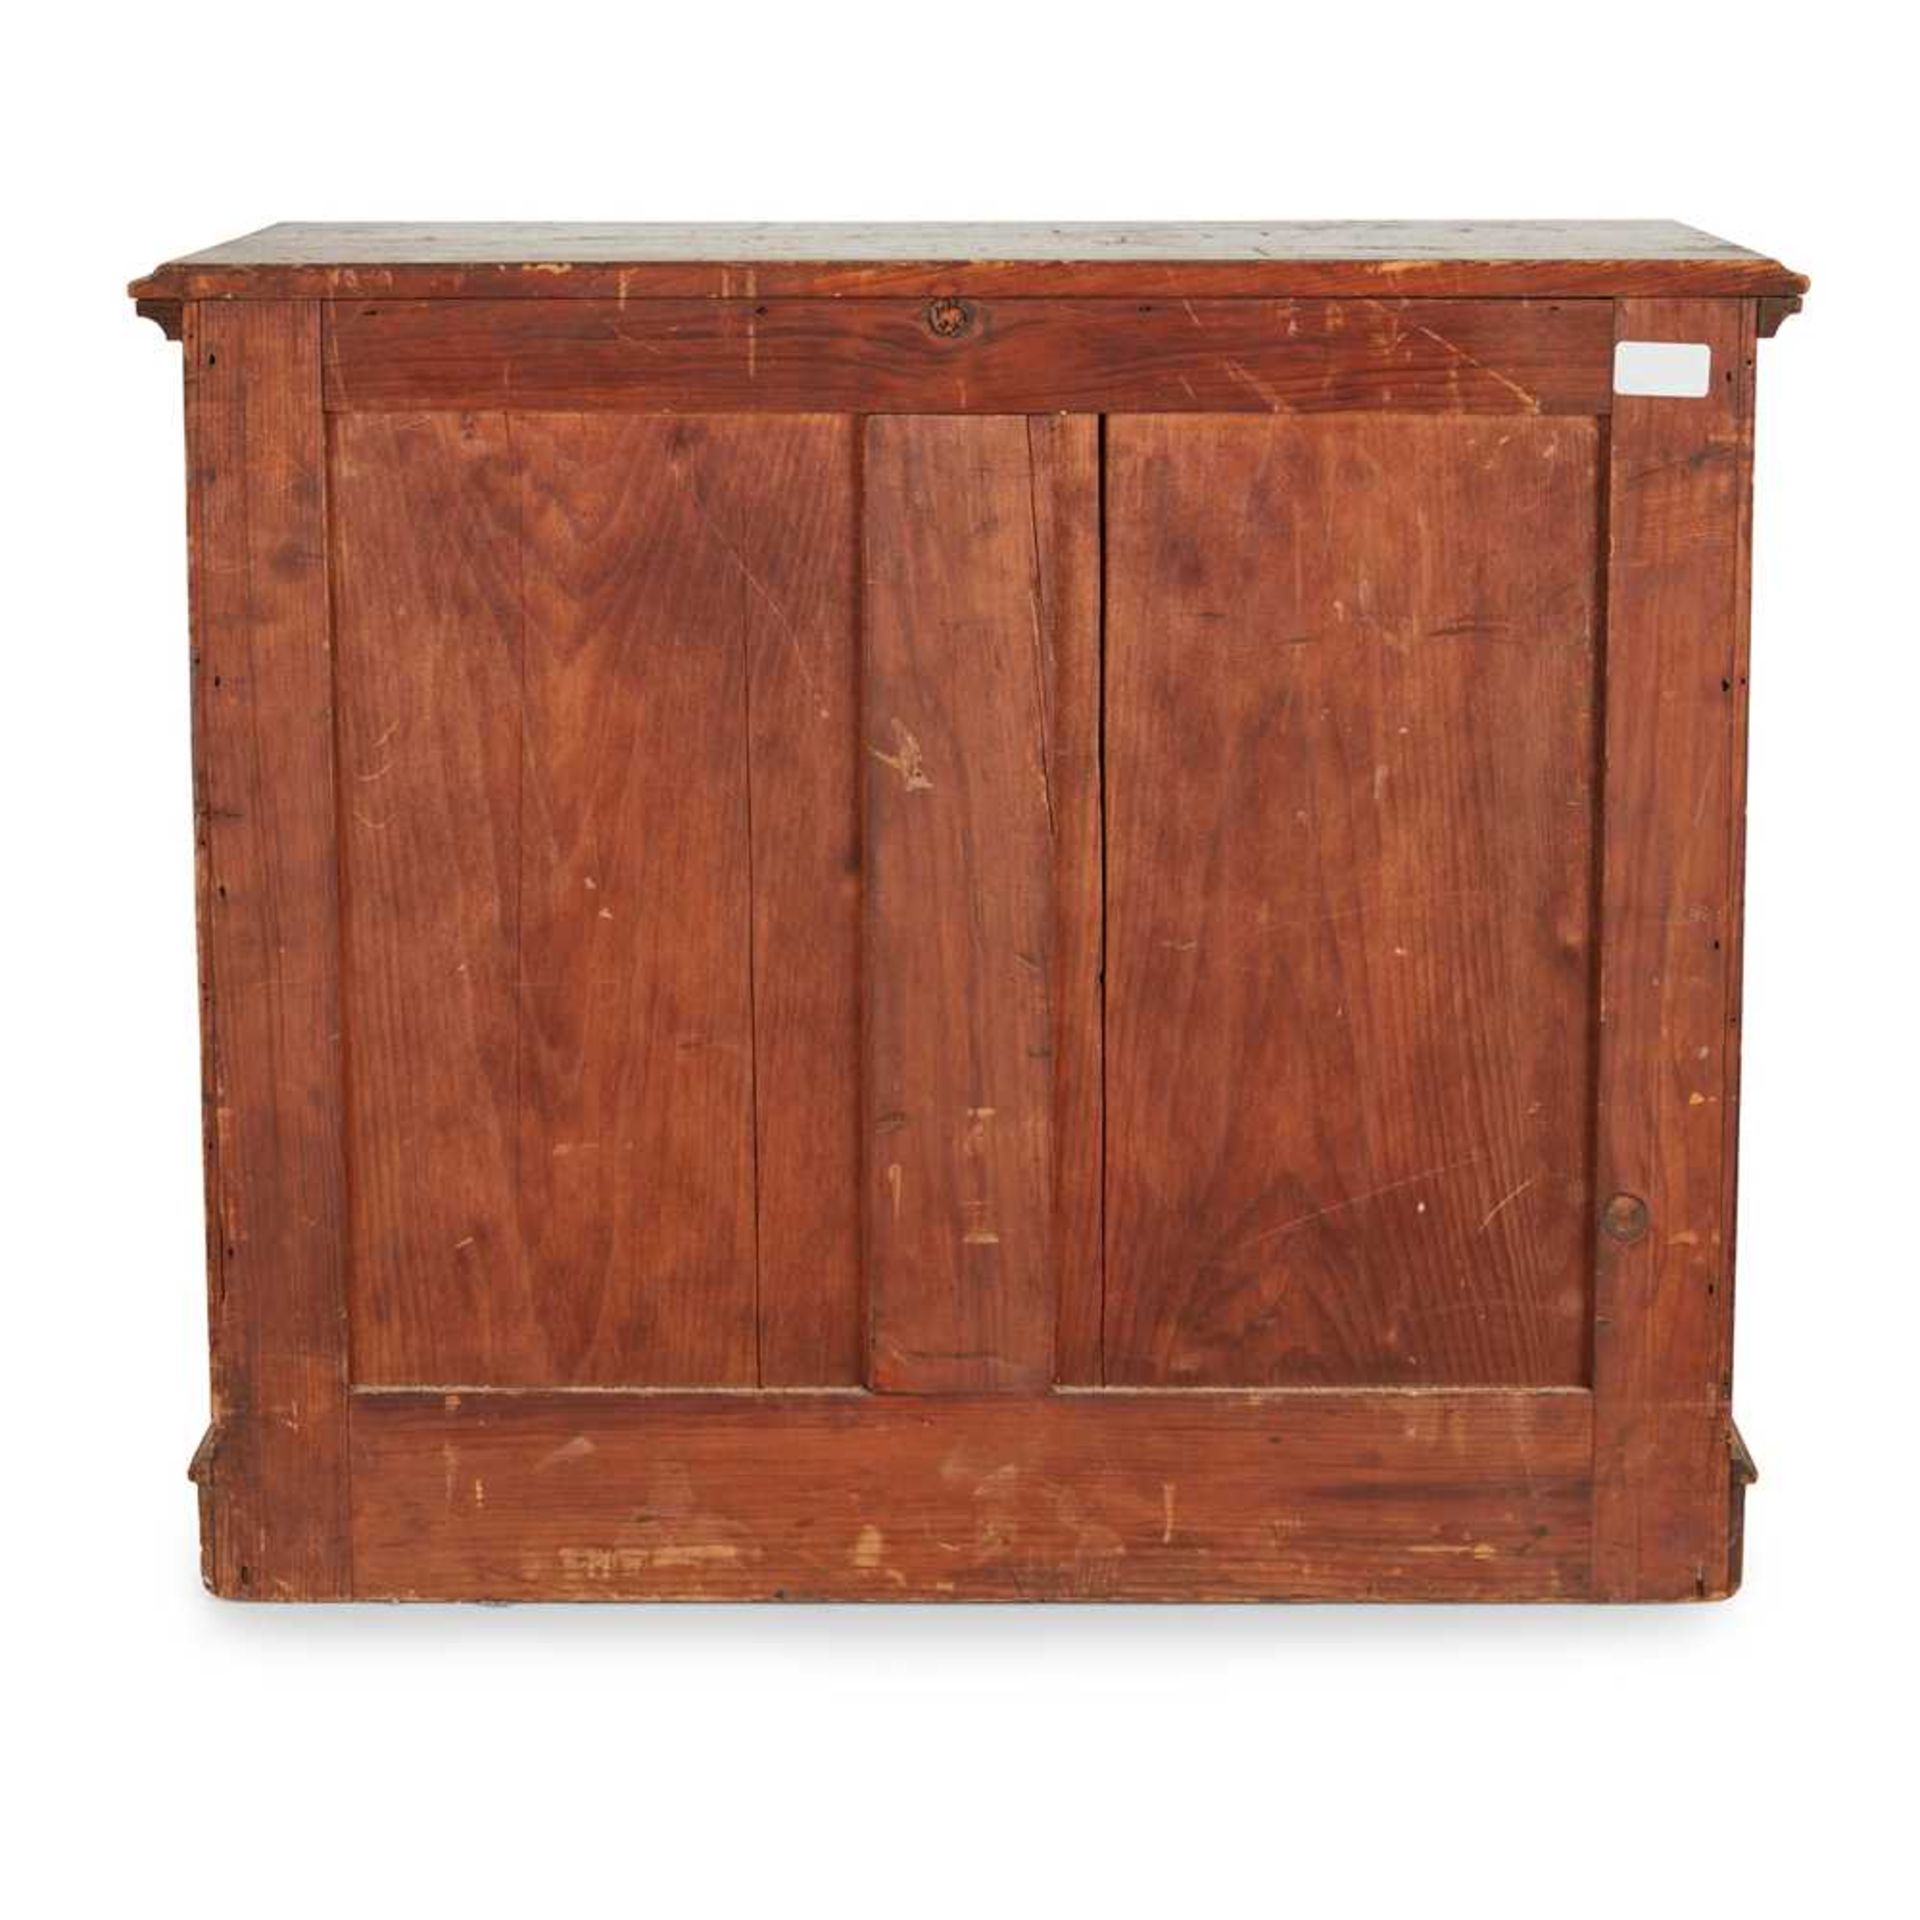 LATE VICTORIAN MAHOGANY MINERAL AND ROCK COLLECTOR'S CABINET LATE 19TH CENTURY - Image 5 of 7